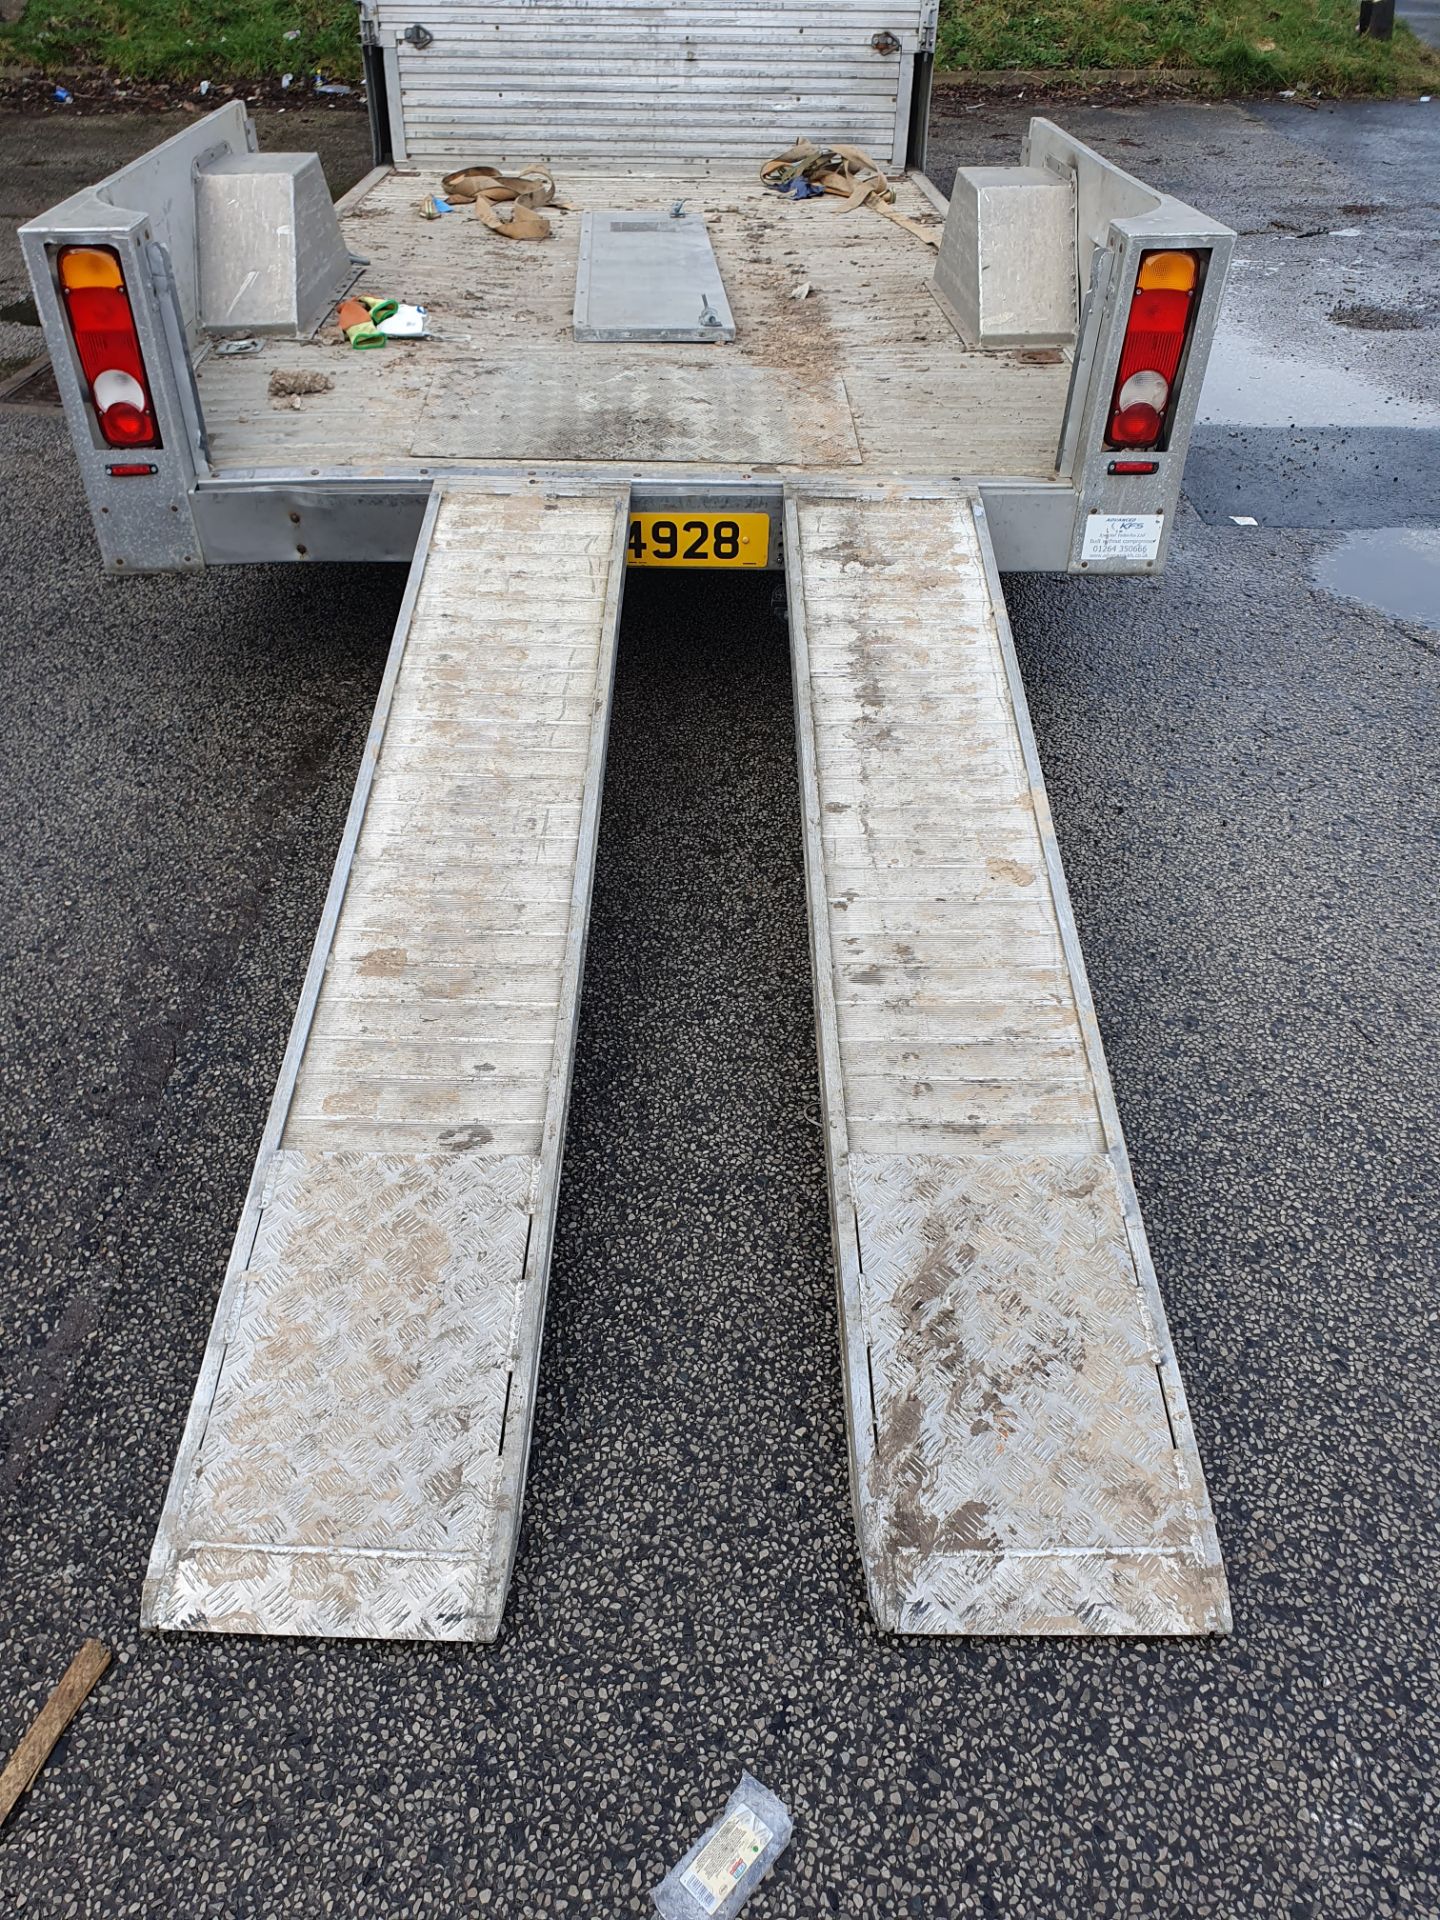 Citroen Relay X2-50 Flat Lorry w/ Loading Ramp Sides | DIG 4928 | 148,060 Miles - Image 11 of 20